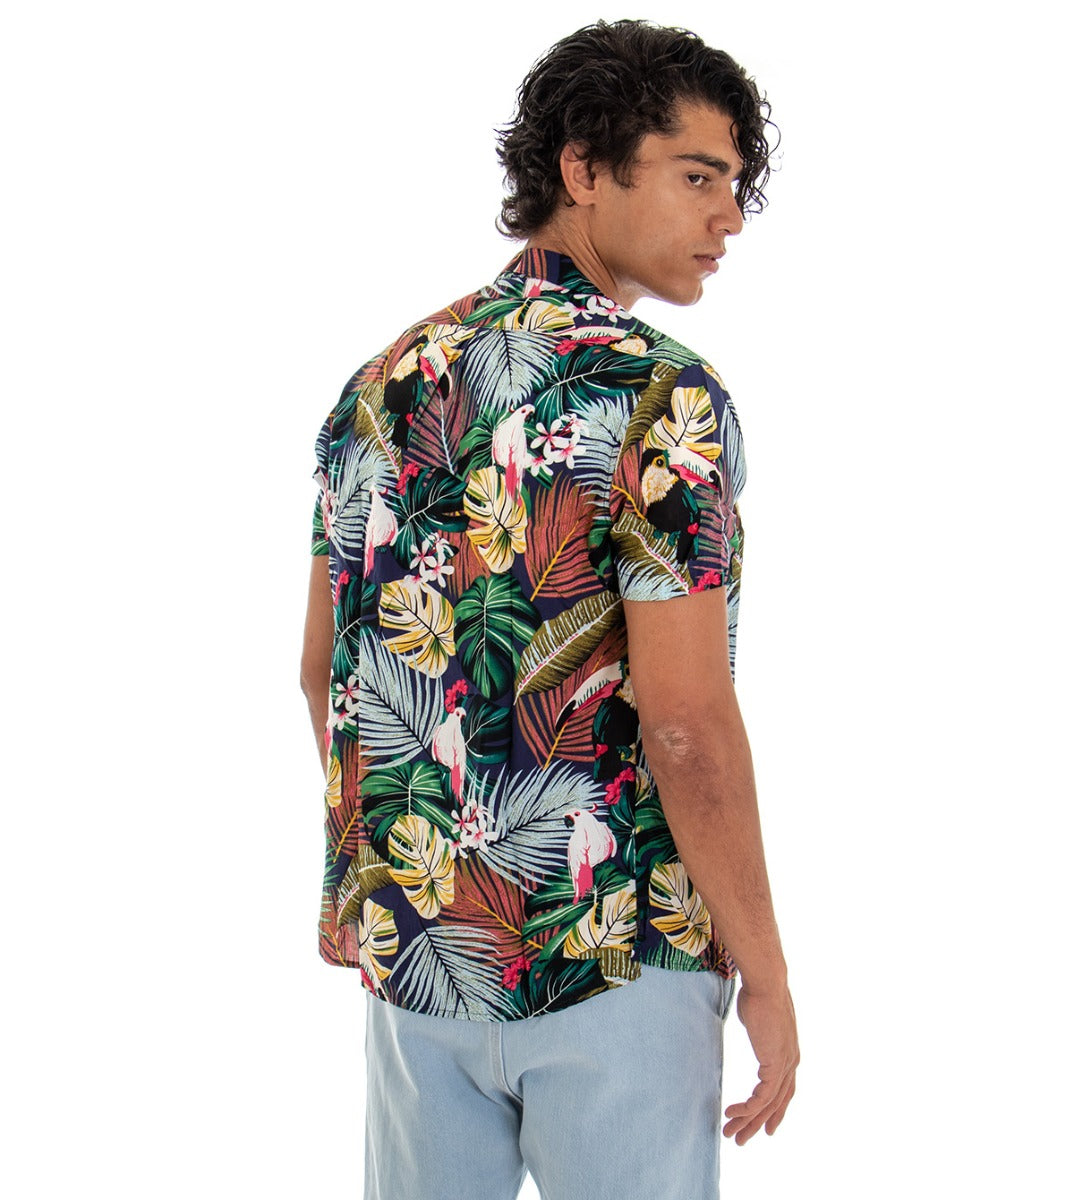 Men's Shirt Short Sleeve Multicolored Floral Pattern Blue GIOSAL-CC1106A